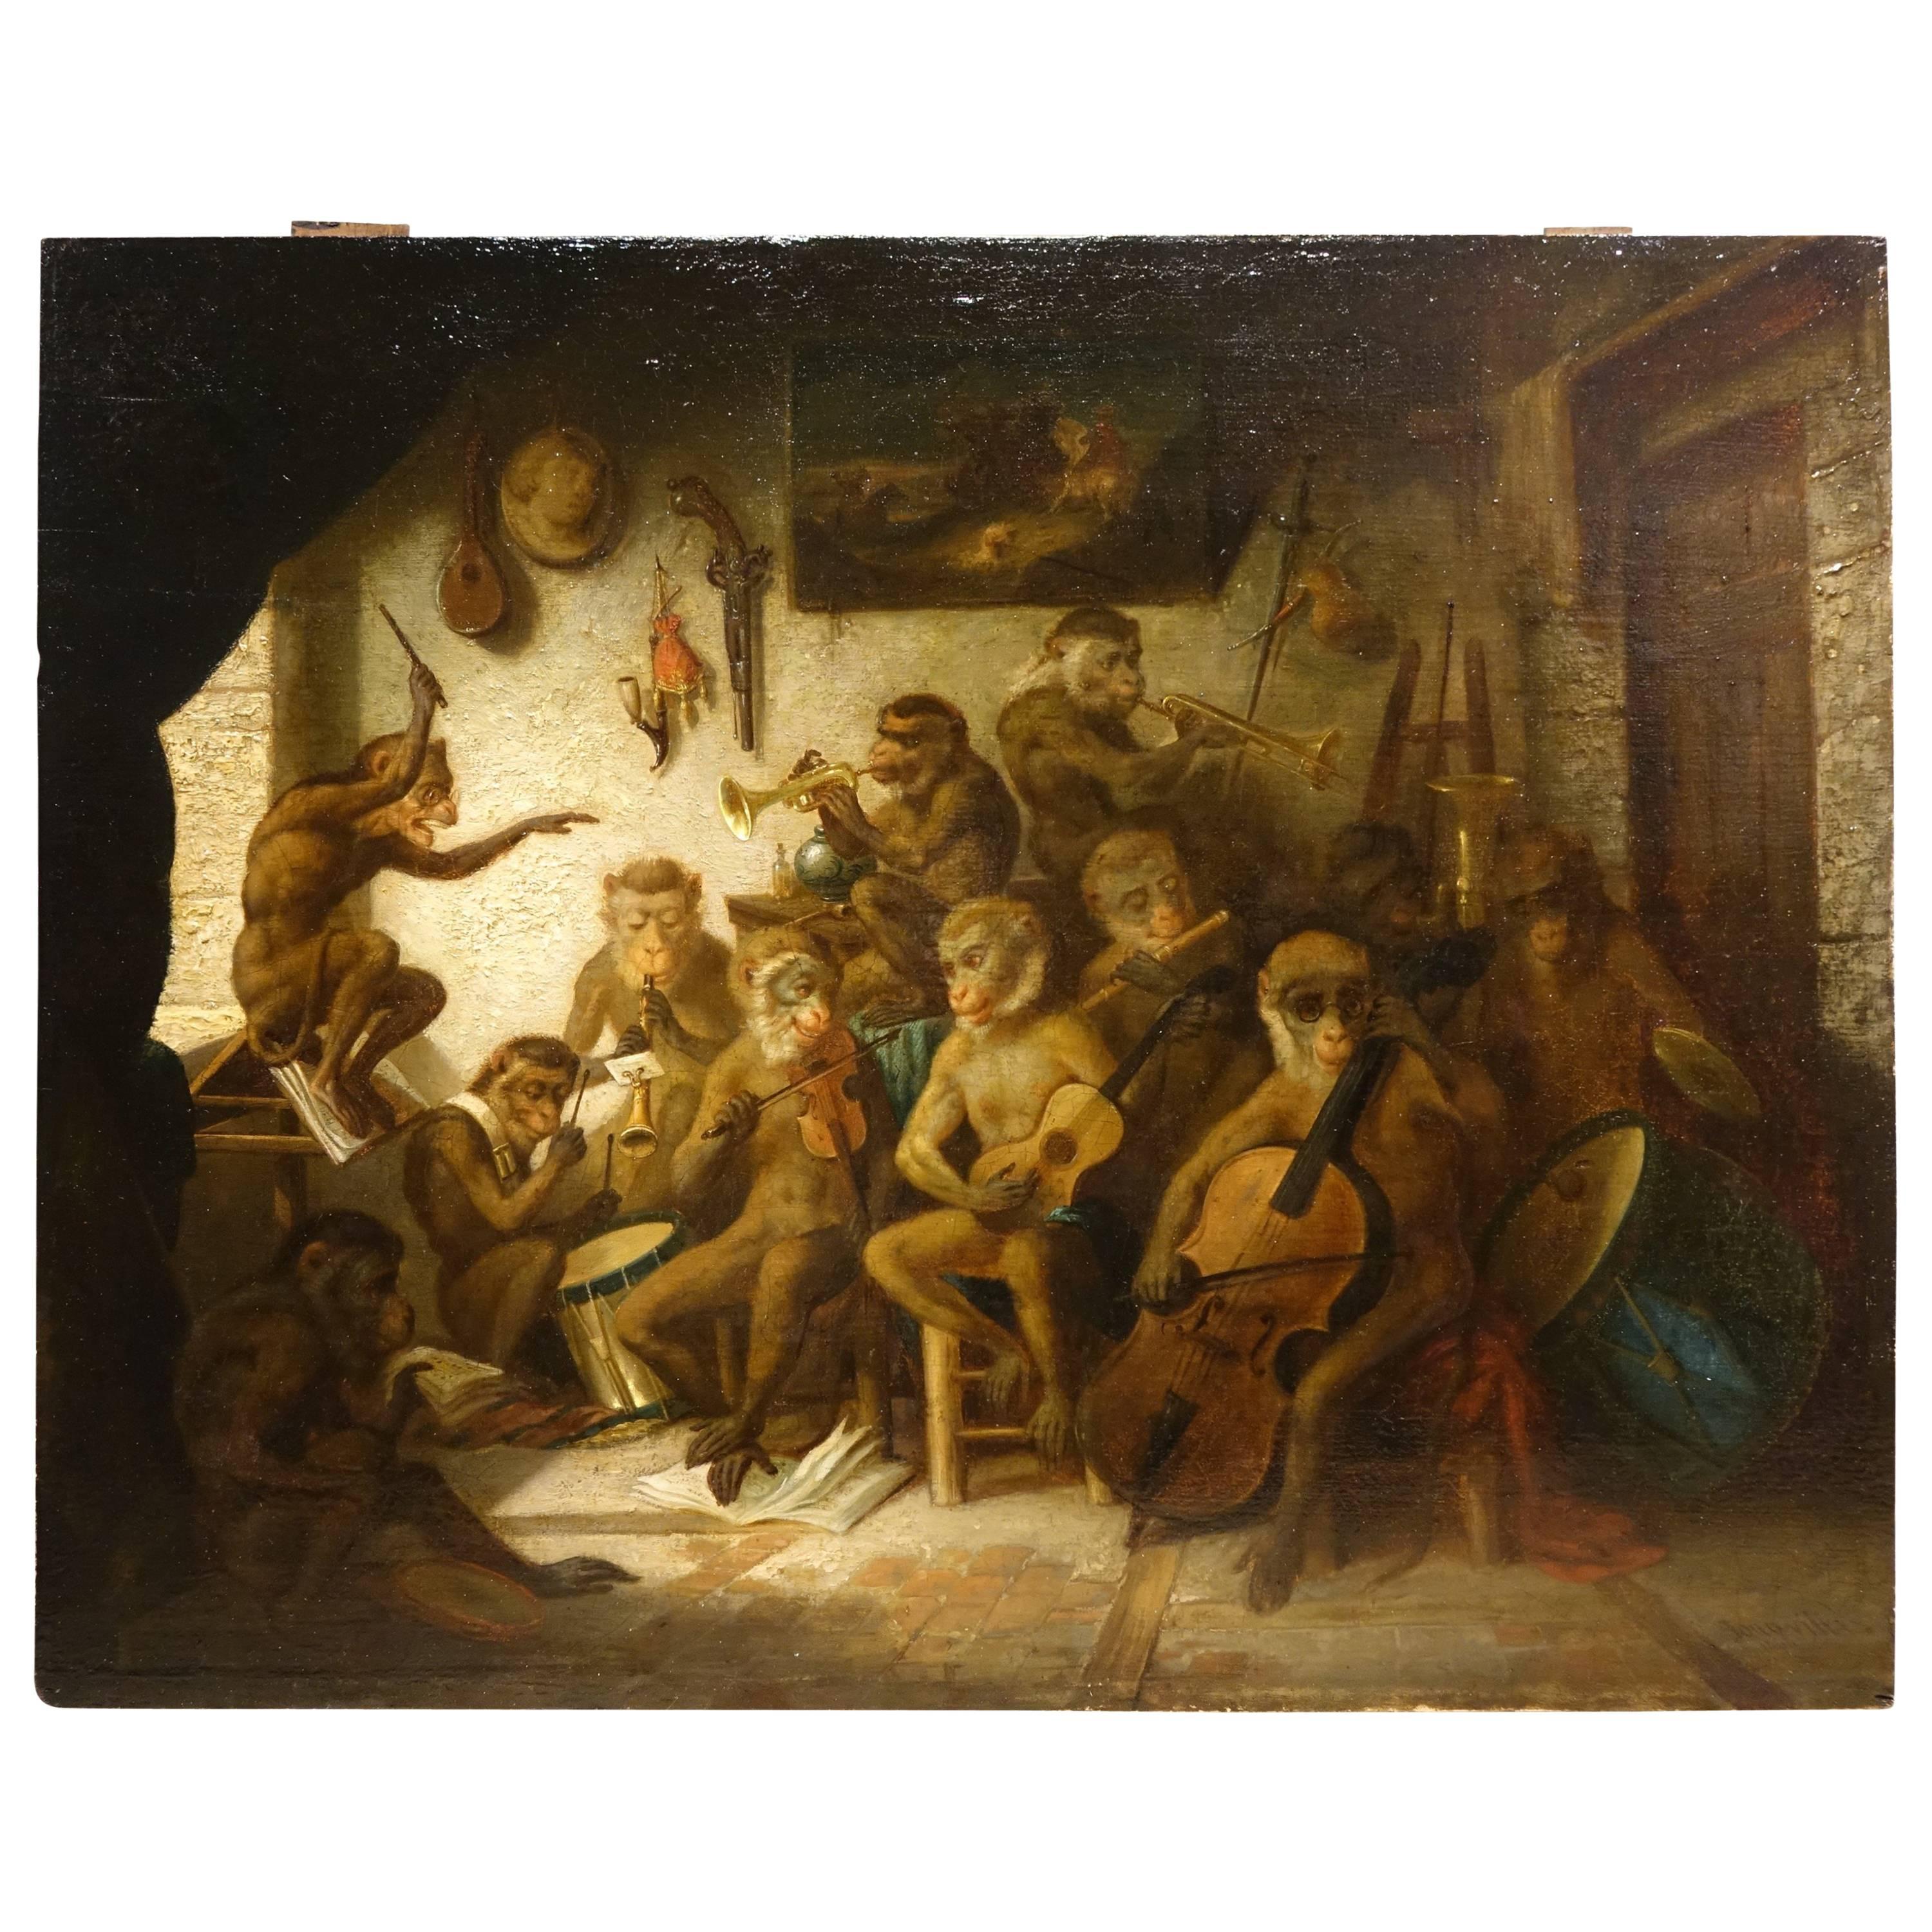  Orchestra of Monkeys, Oil on Panel , French School, Circa 1850